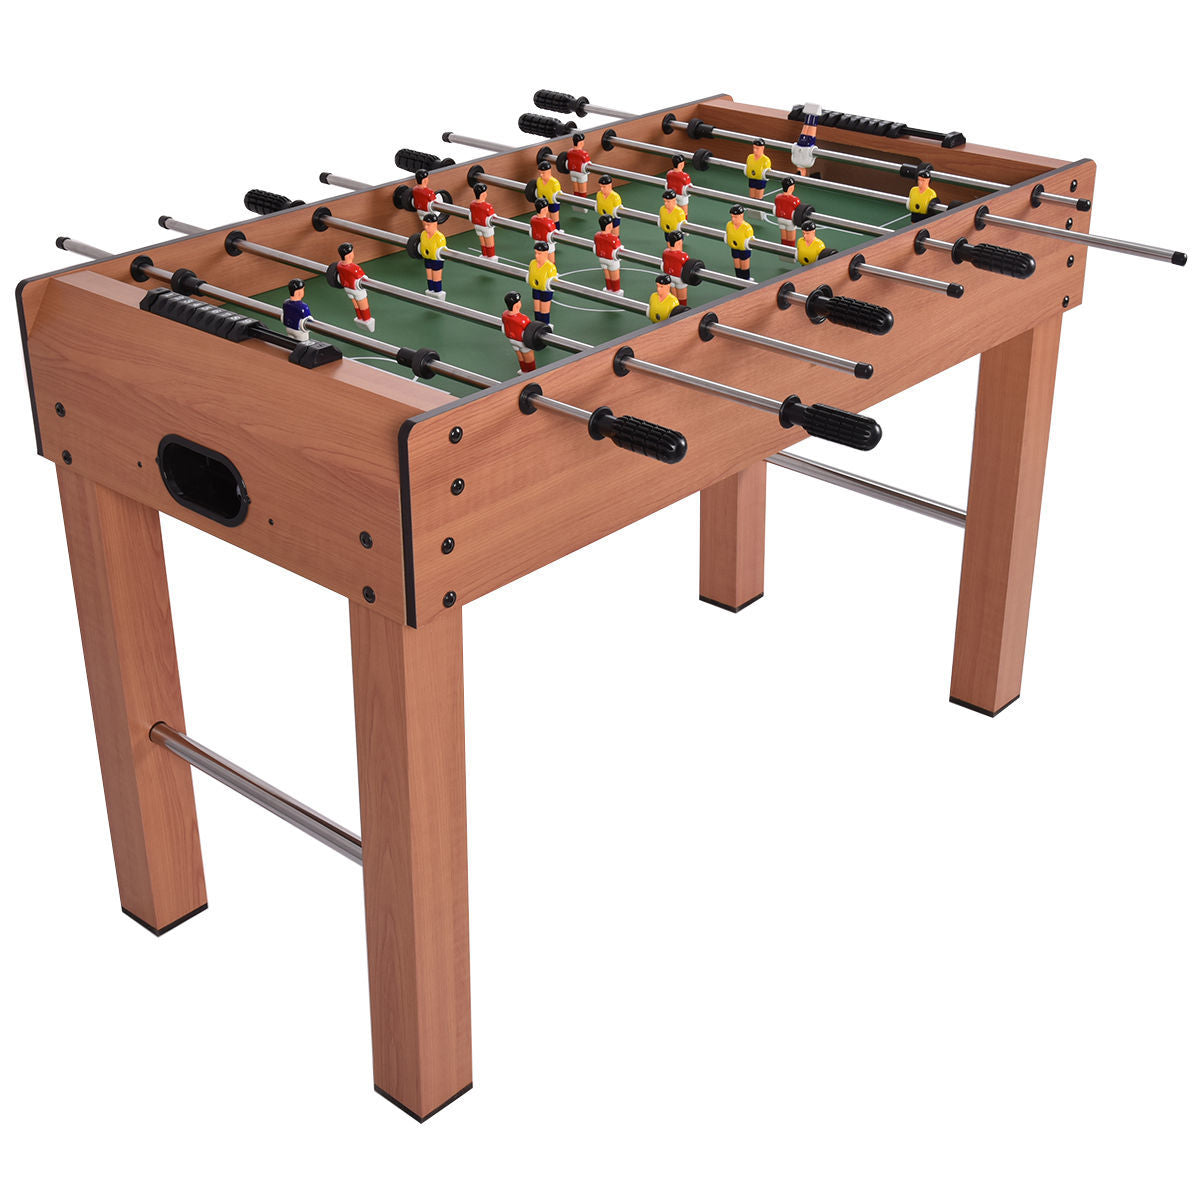 48 Inch Competition Game Foosball Table - Color